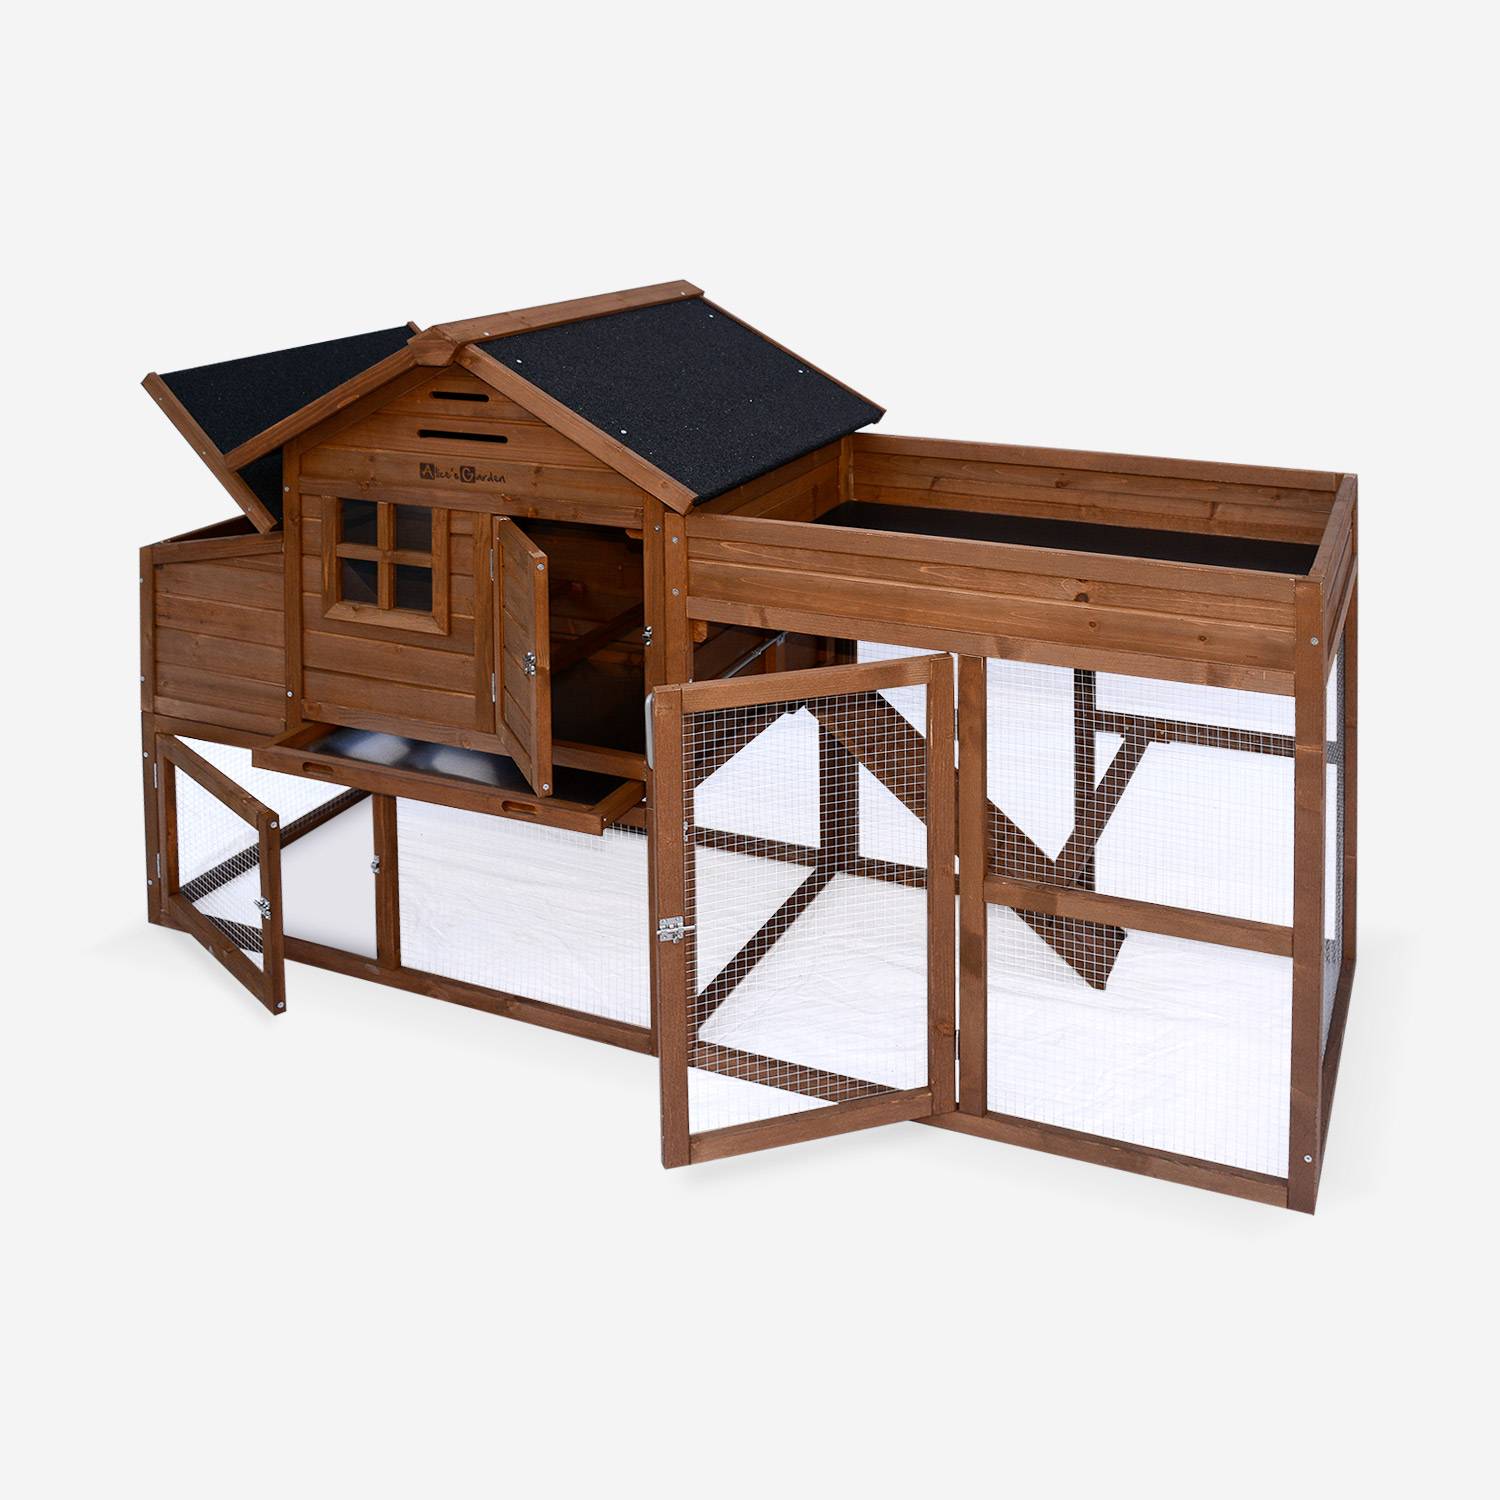 Wooden chicken coop - for 3 chickens, with enclosure and integrated planter - Campine - Wood colour Photo2